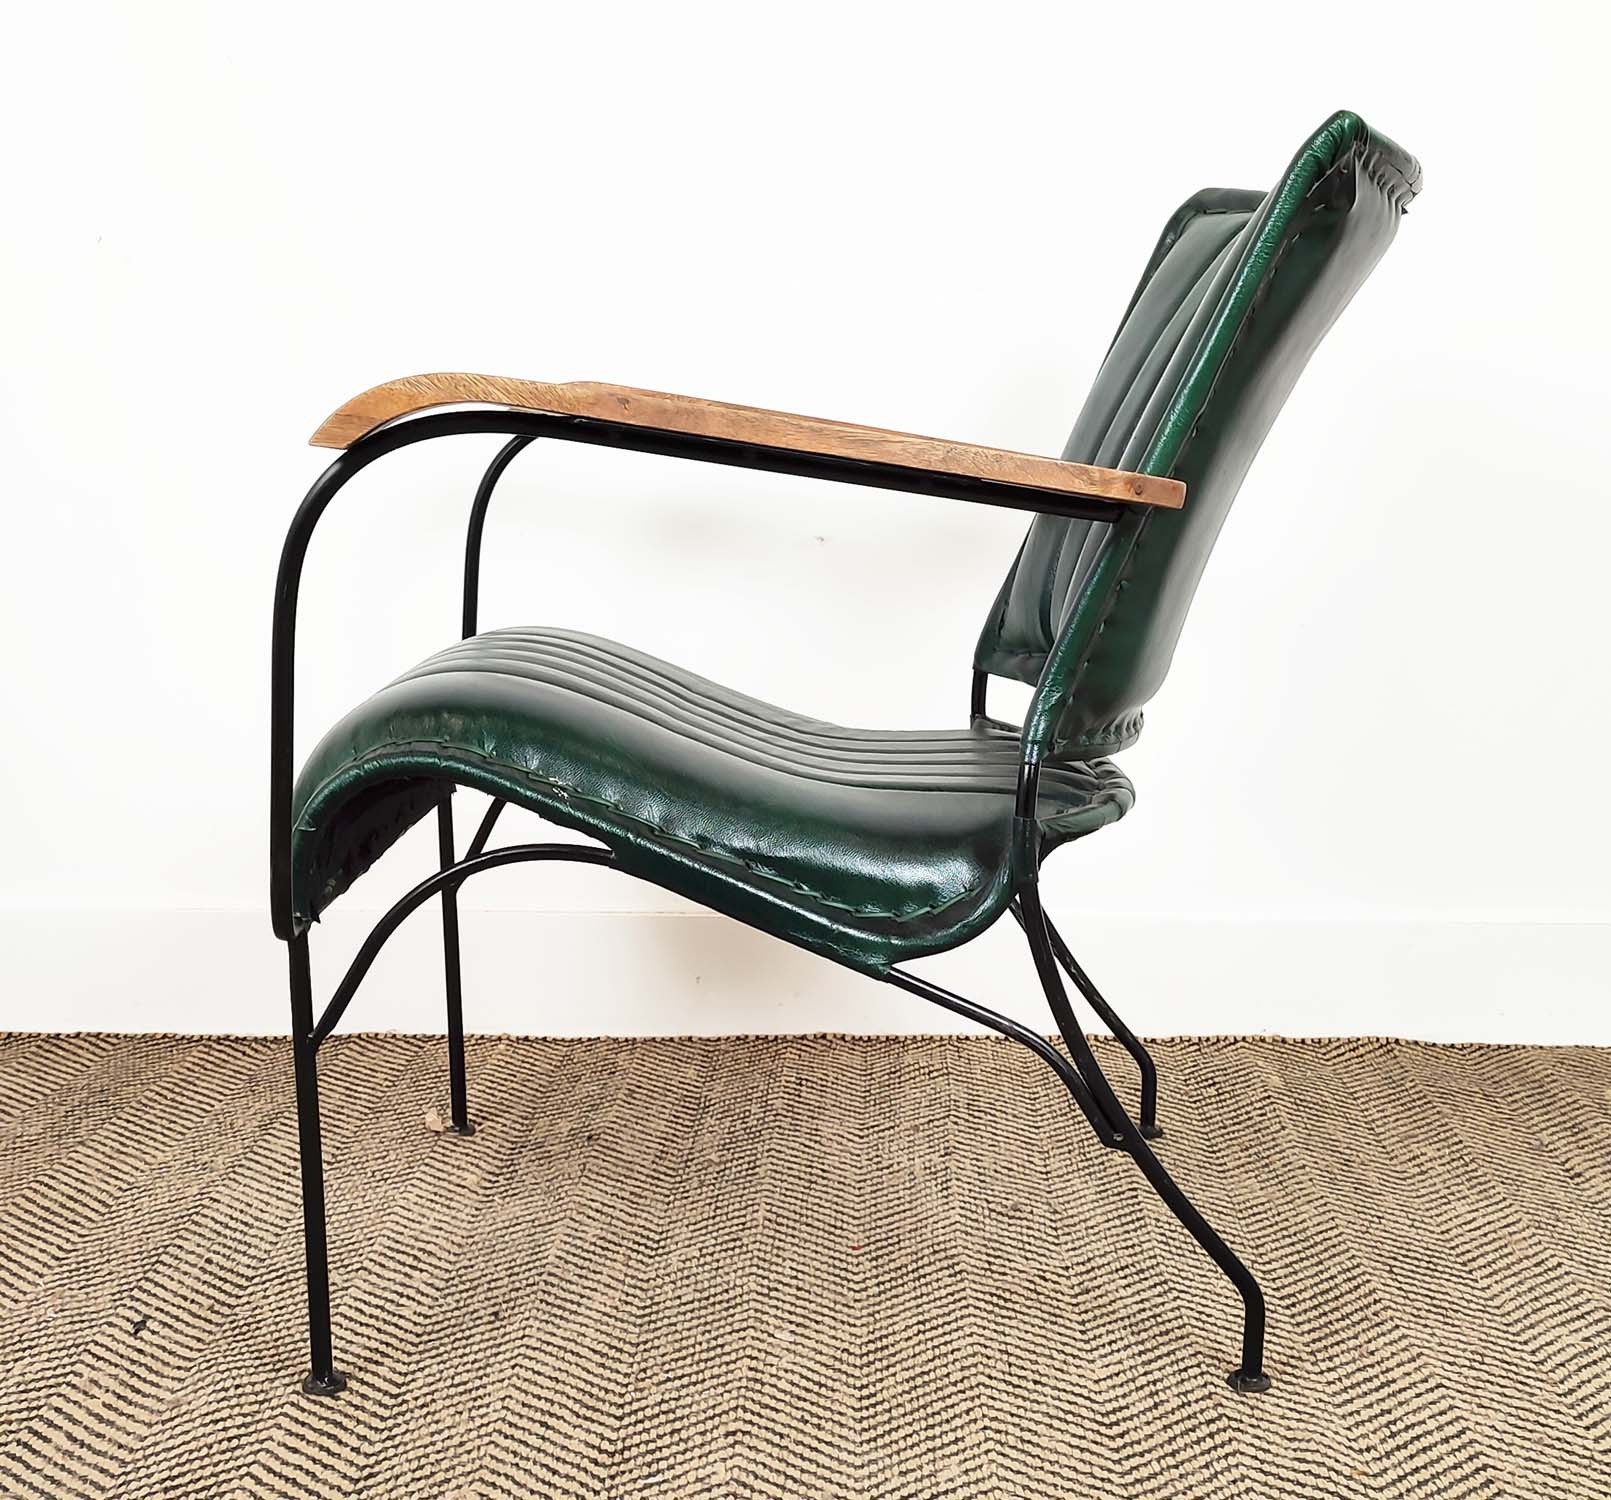 ARMCHAIRS, a pair, green leather upholstery with wooden arms and metal supports, 65cm x 75cm H x - Image 6 of 7